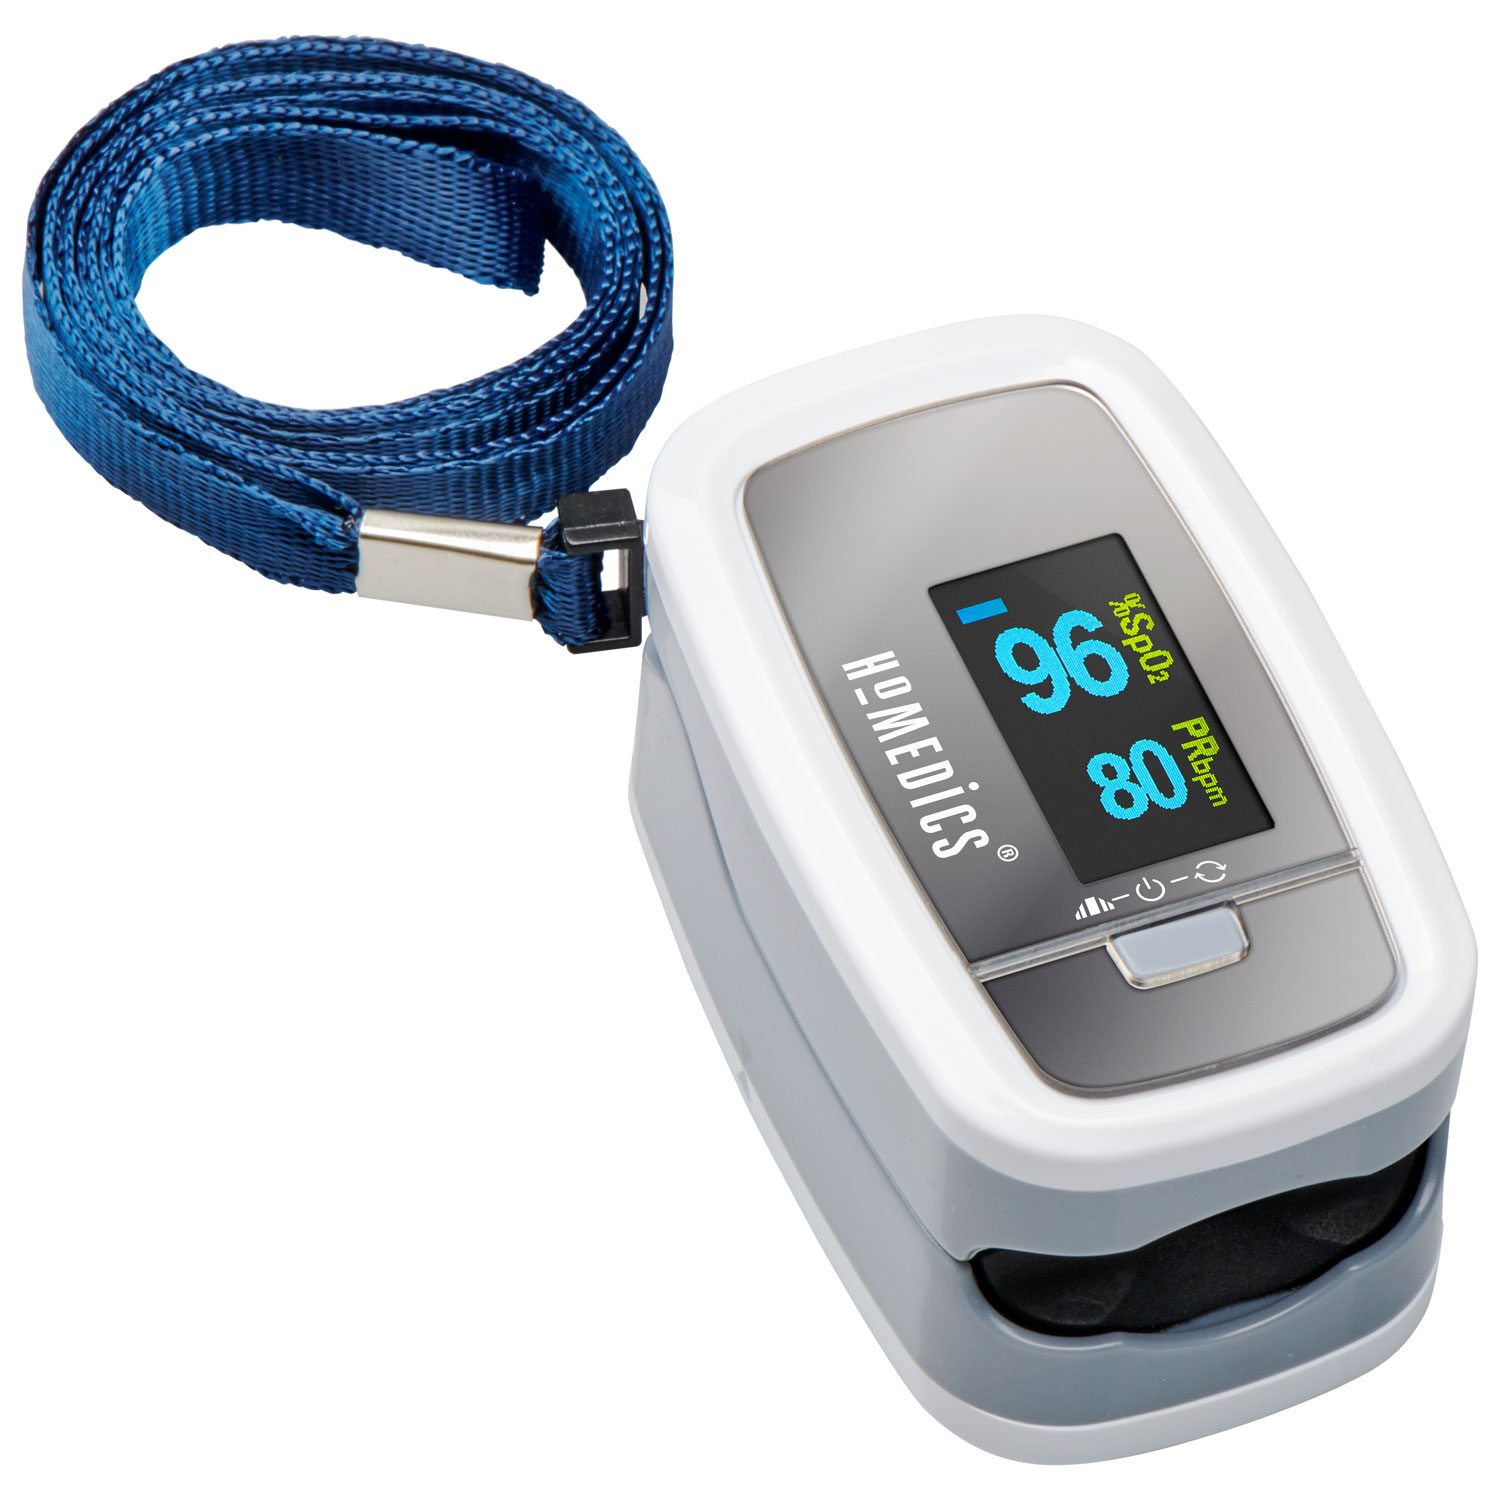 HoMedics Premium Pulse Oximeter with Heart Rate Monitor (PX-131CO-CA)